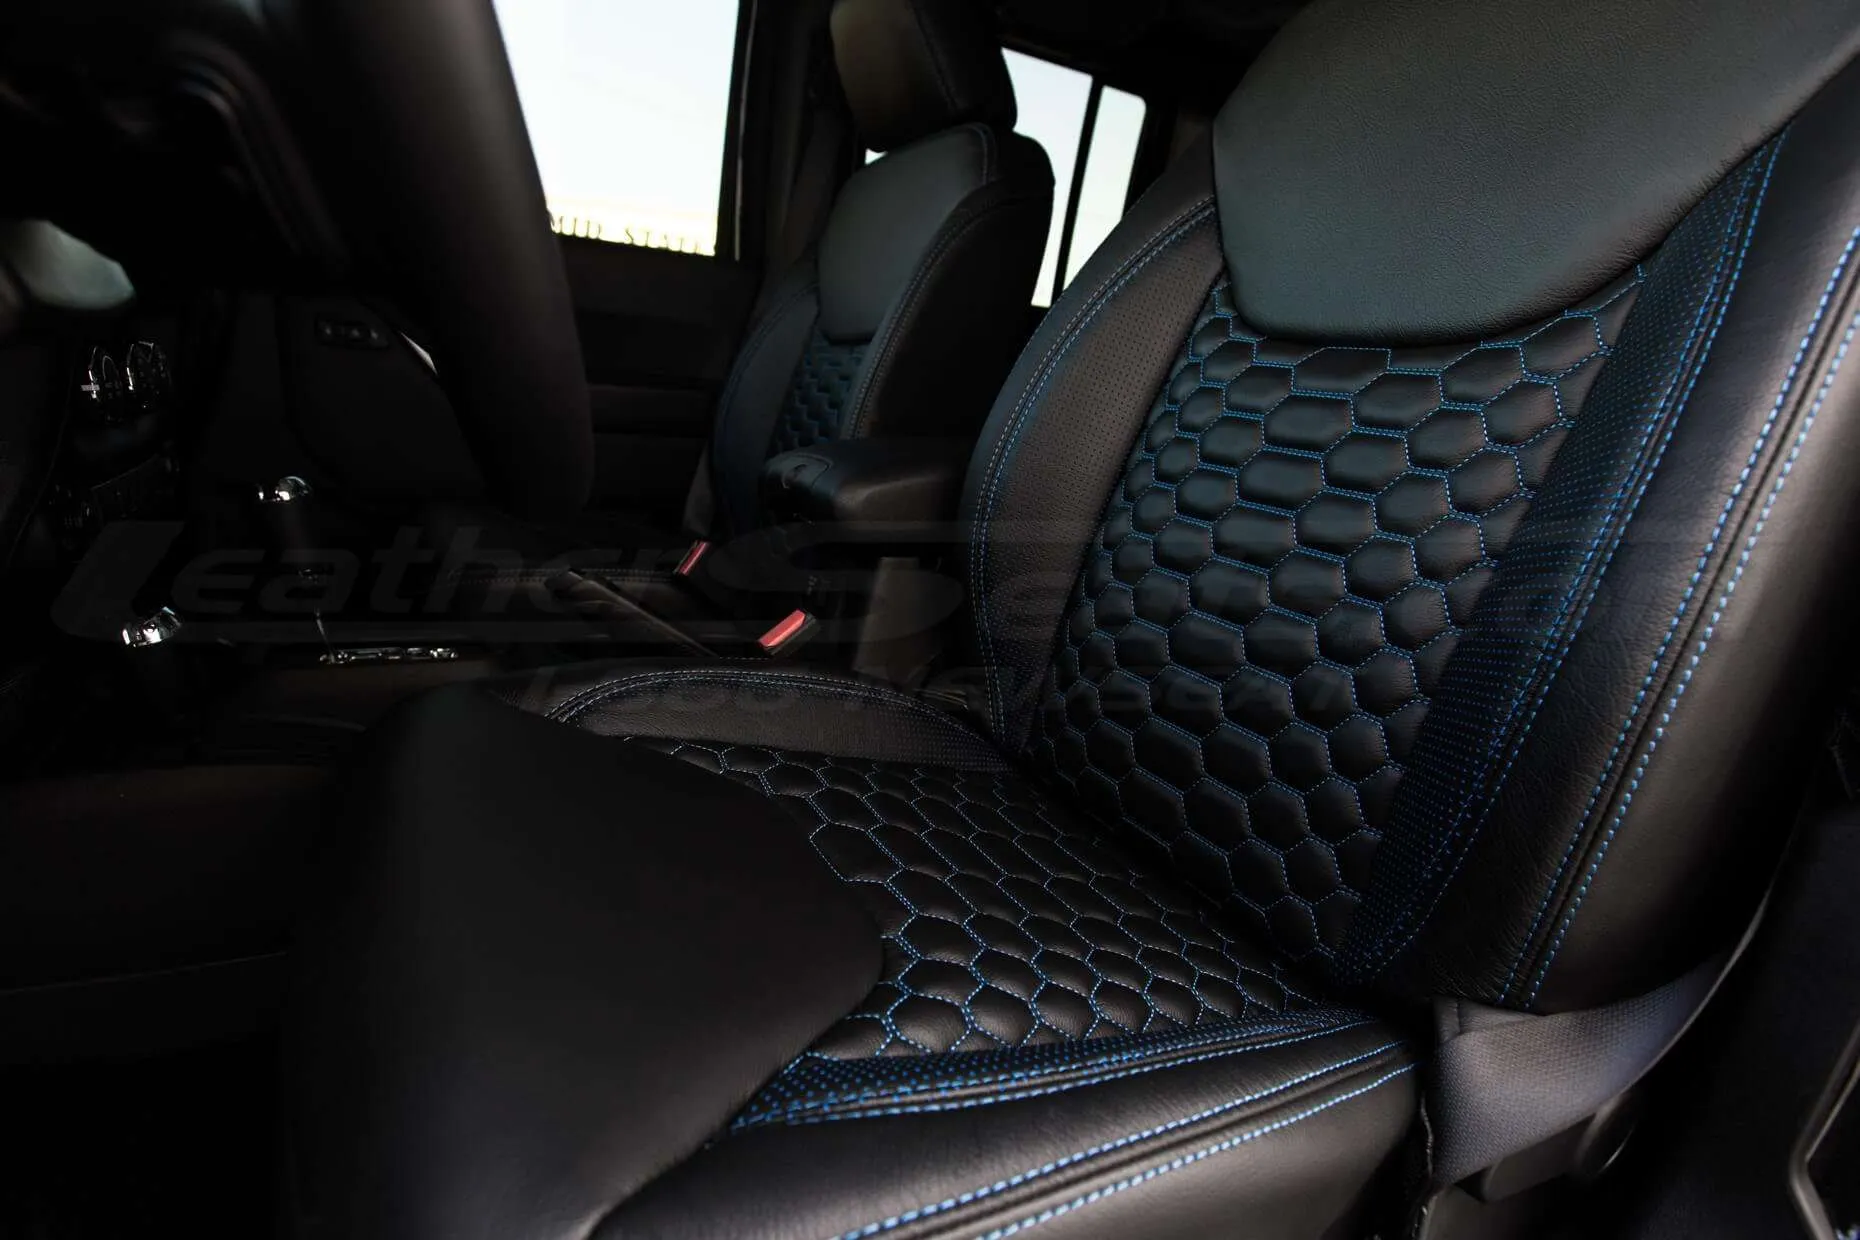 2013-2018 Jeep Wrangler Bespoked Leather Seats Installed- Black & Cobalt - Reticulated Hex insert